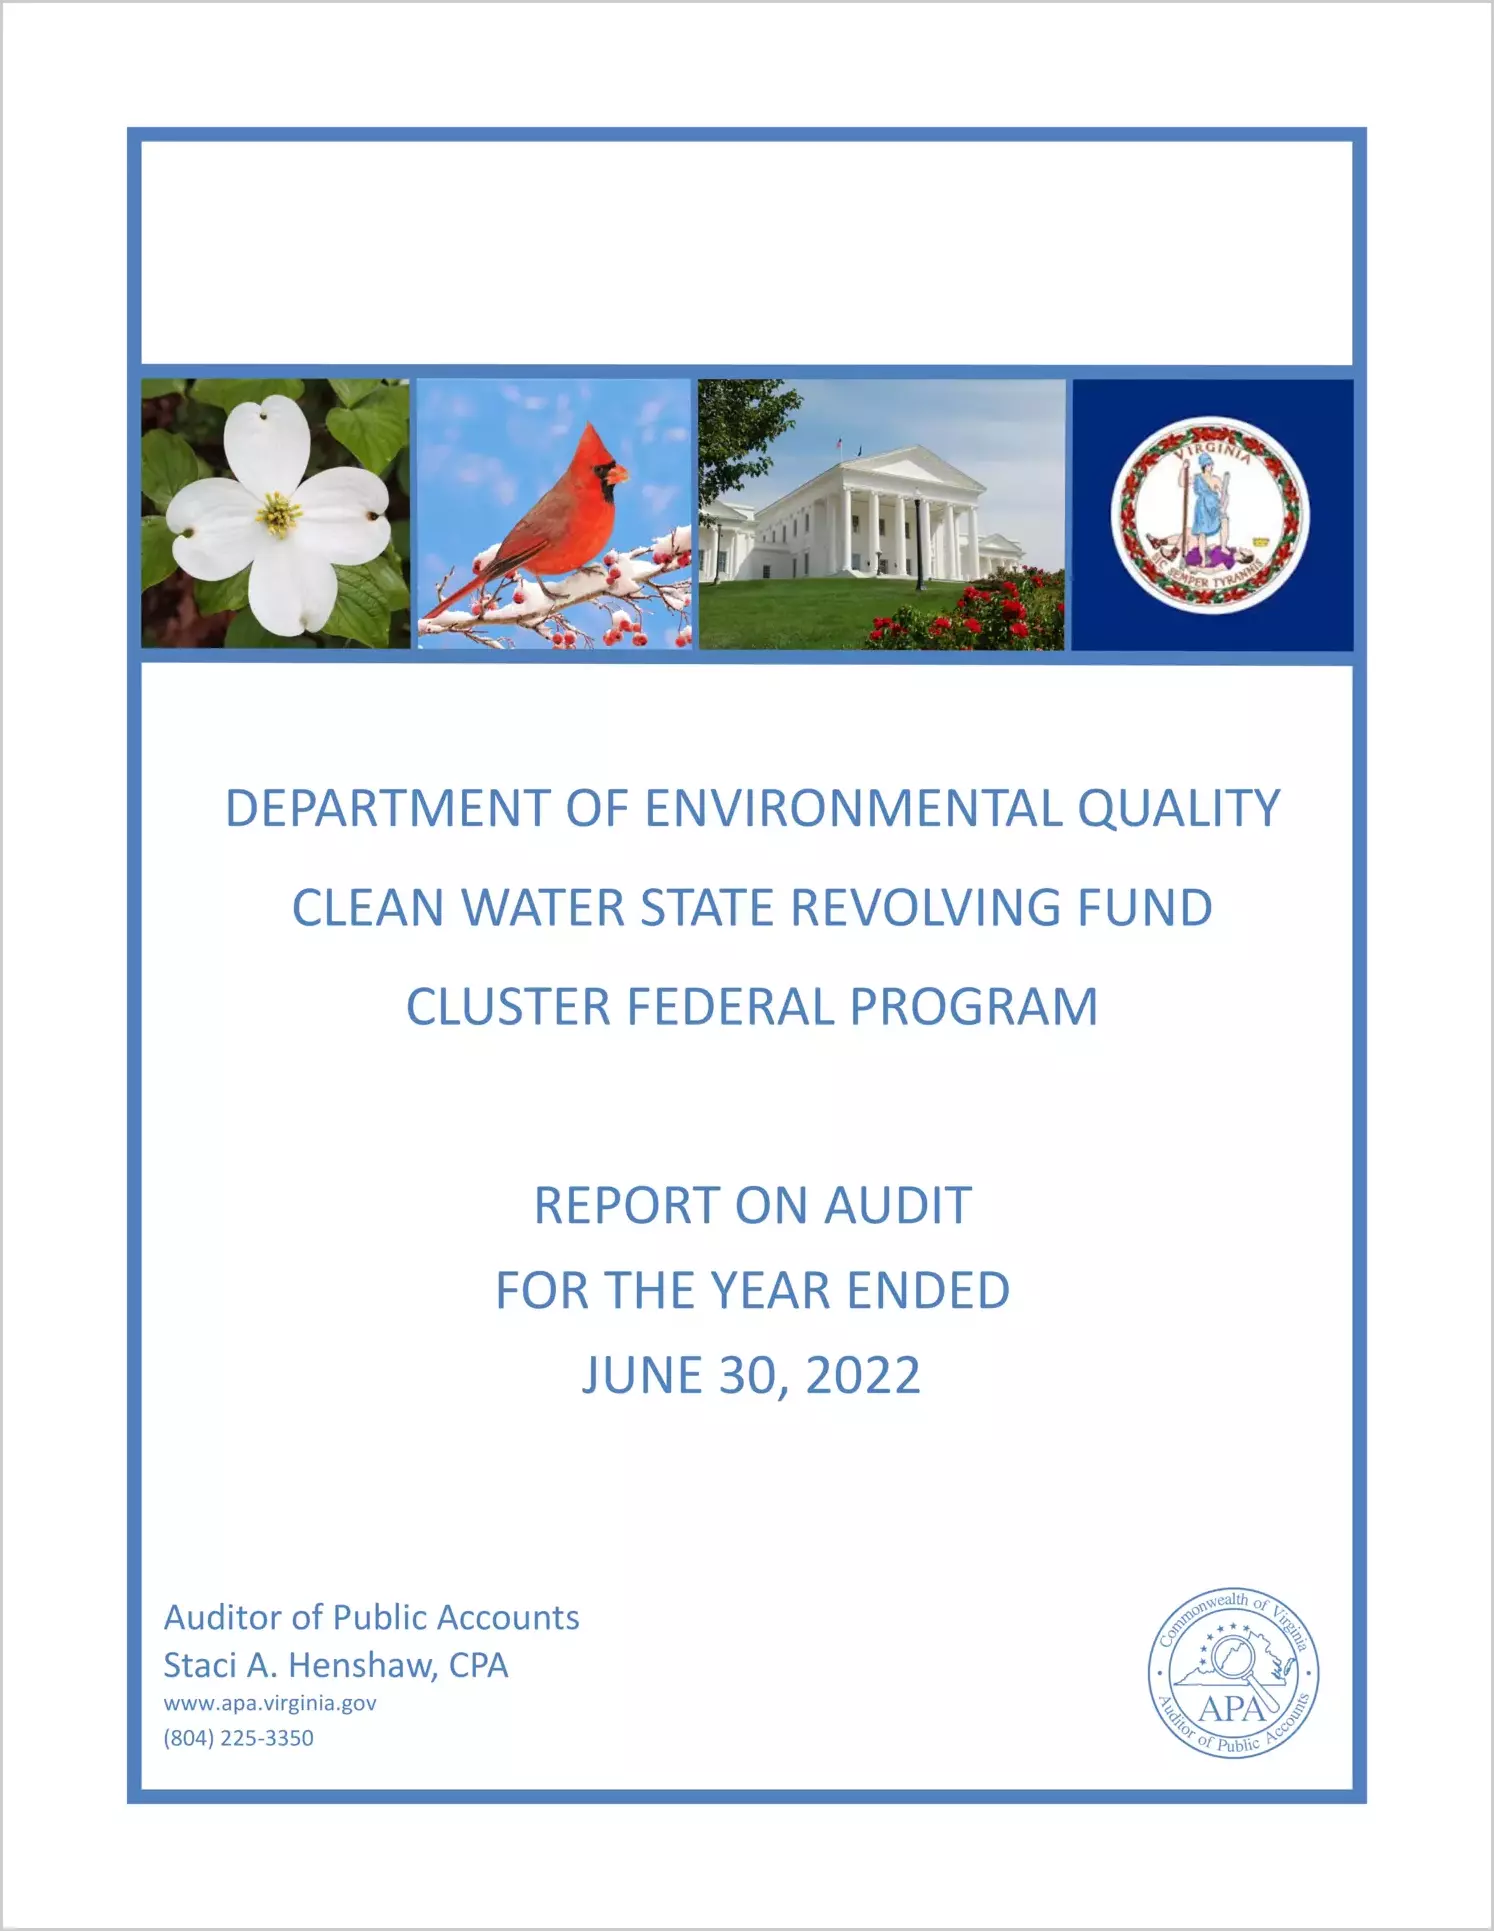 Department of Environmental Quality Clean Water State Revolving Fund Cluster Federal Program for the year ended June 30, 2022